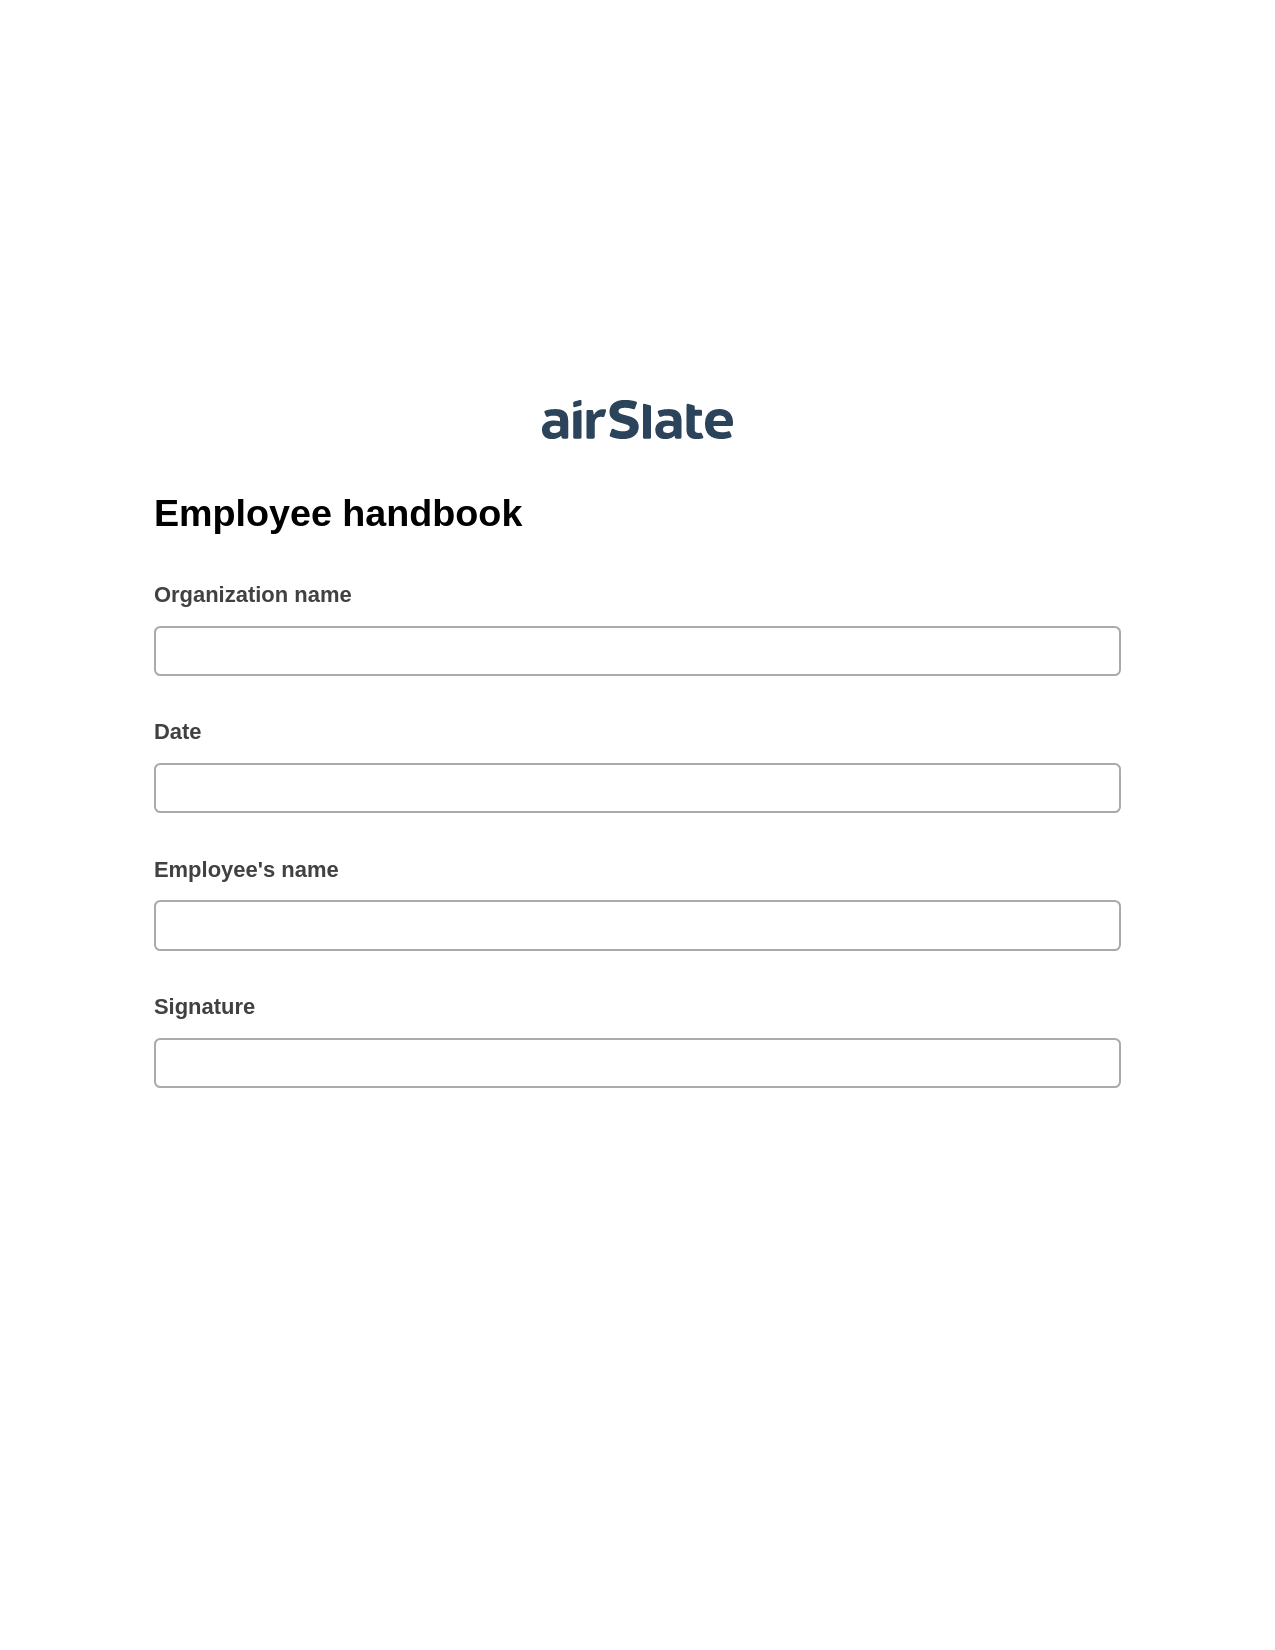 Multirole Employee handbook Pre-fill from NetSuite Records Bot, Send Mailchimp Campaign Bot, Export to Smartsheet